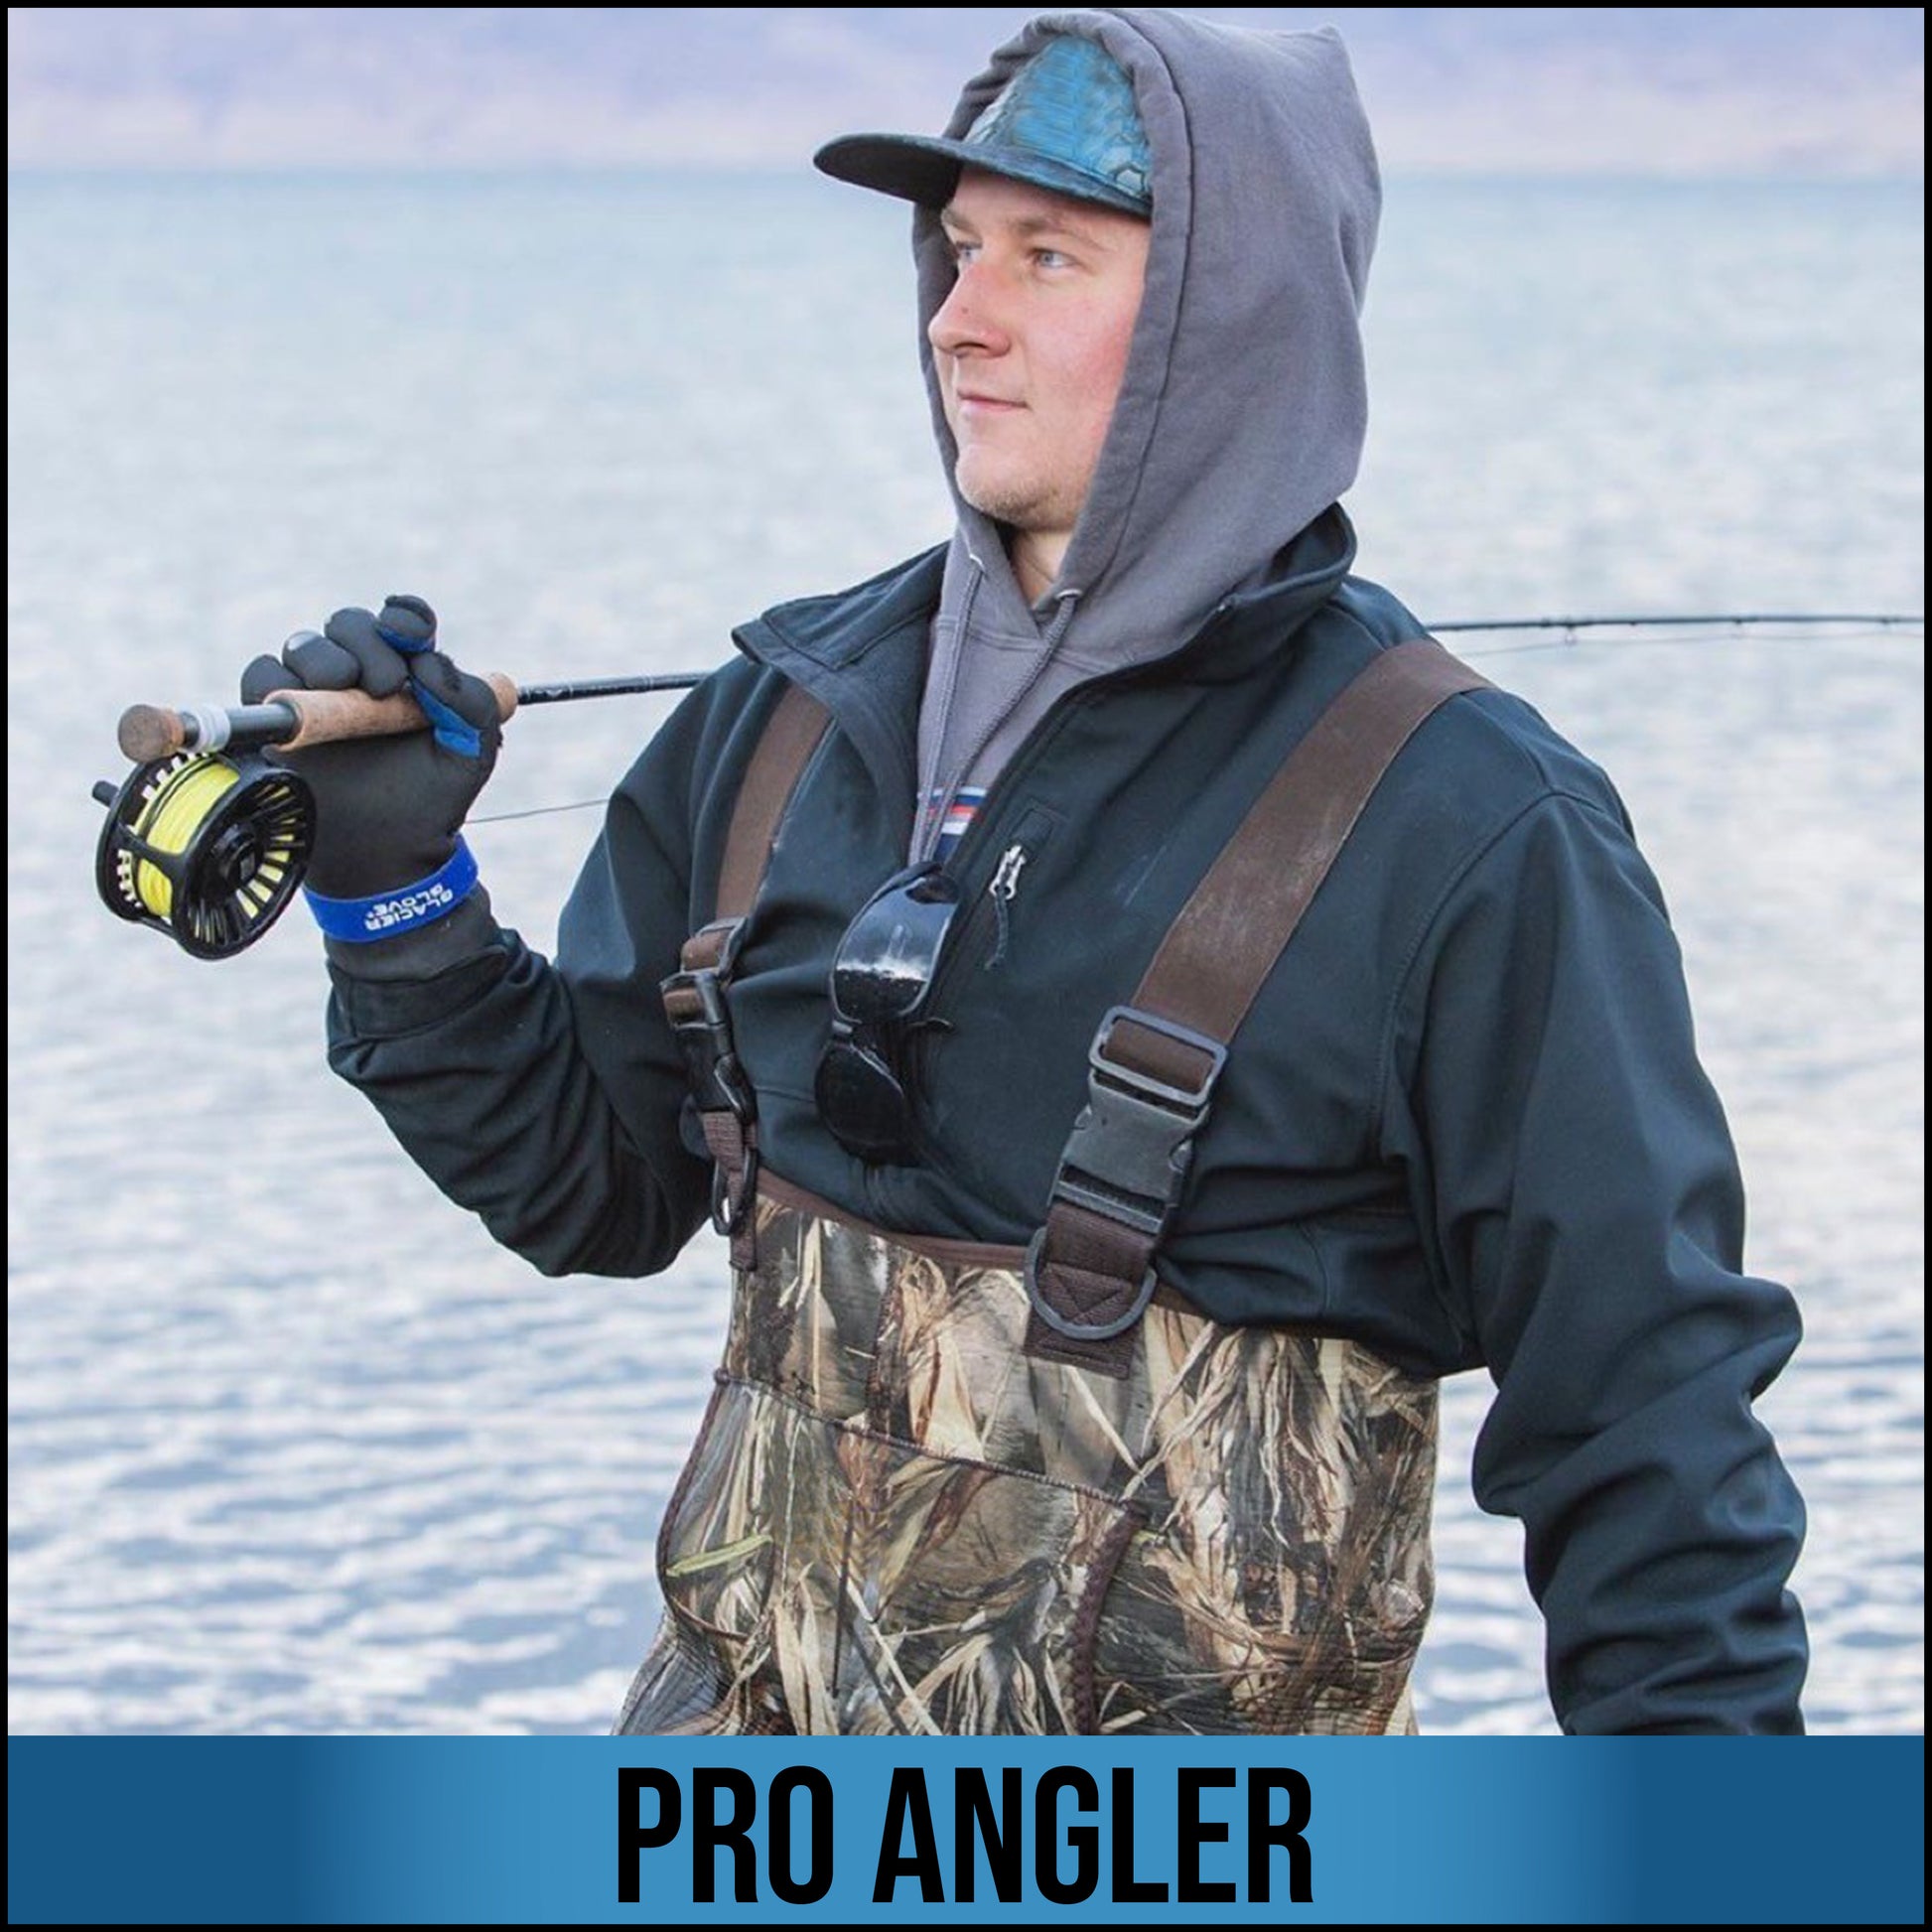 Pro Angler™ – Glacier Outdoor Products